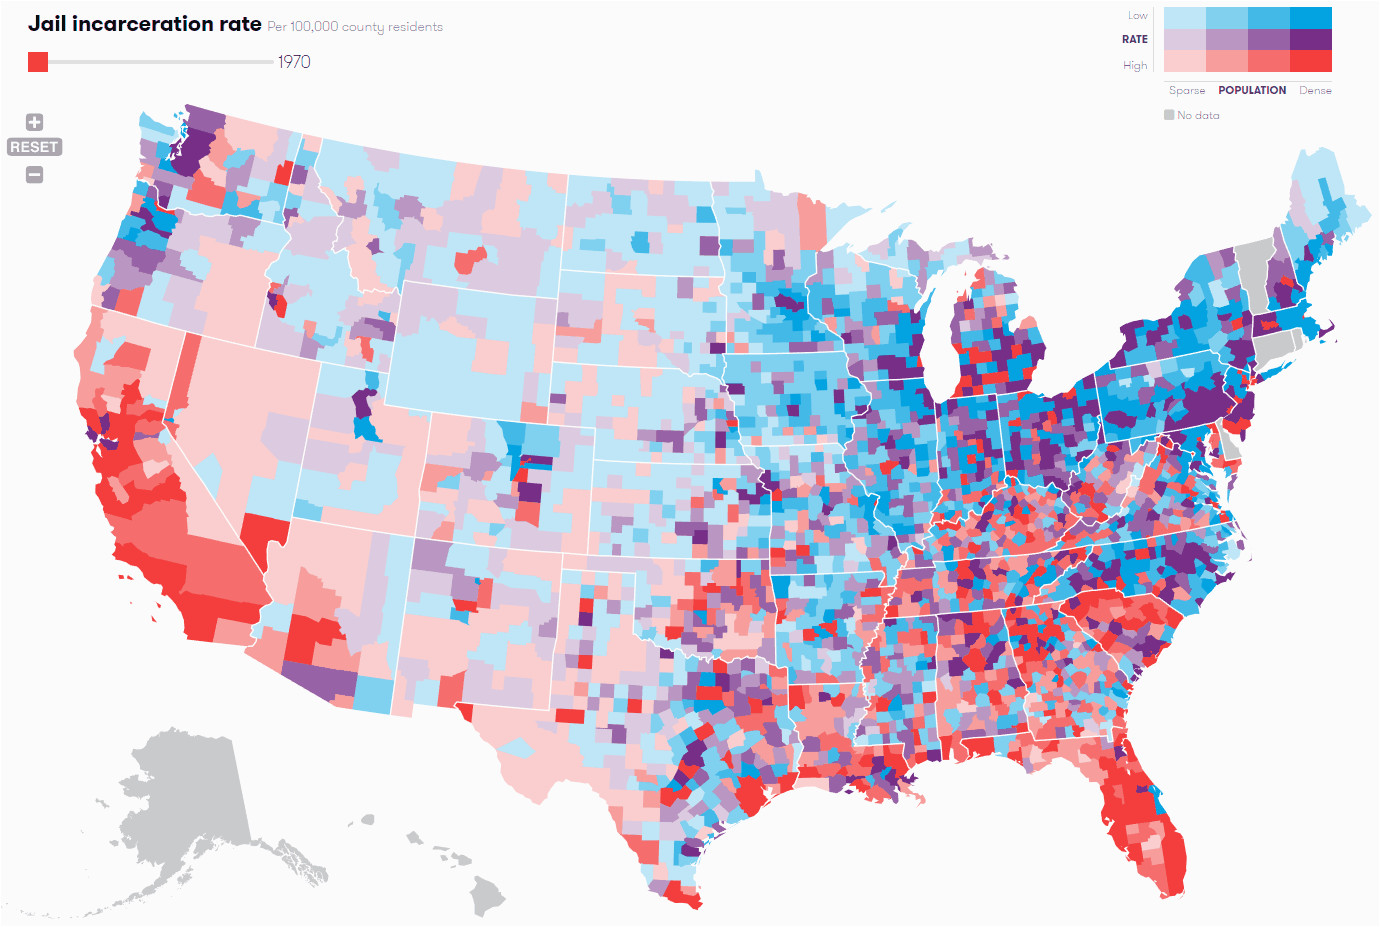 jail incarceration rate per 100 000 u s county residents data